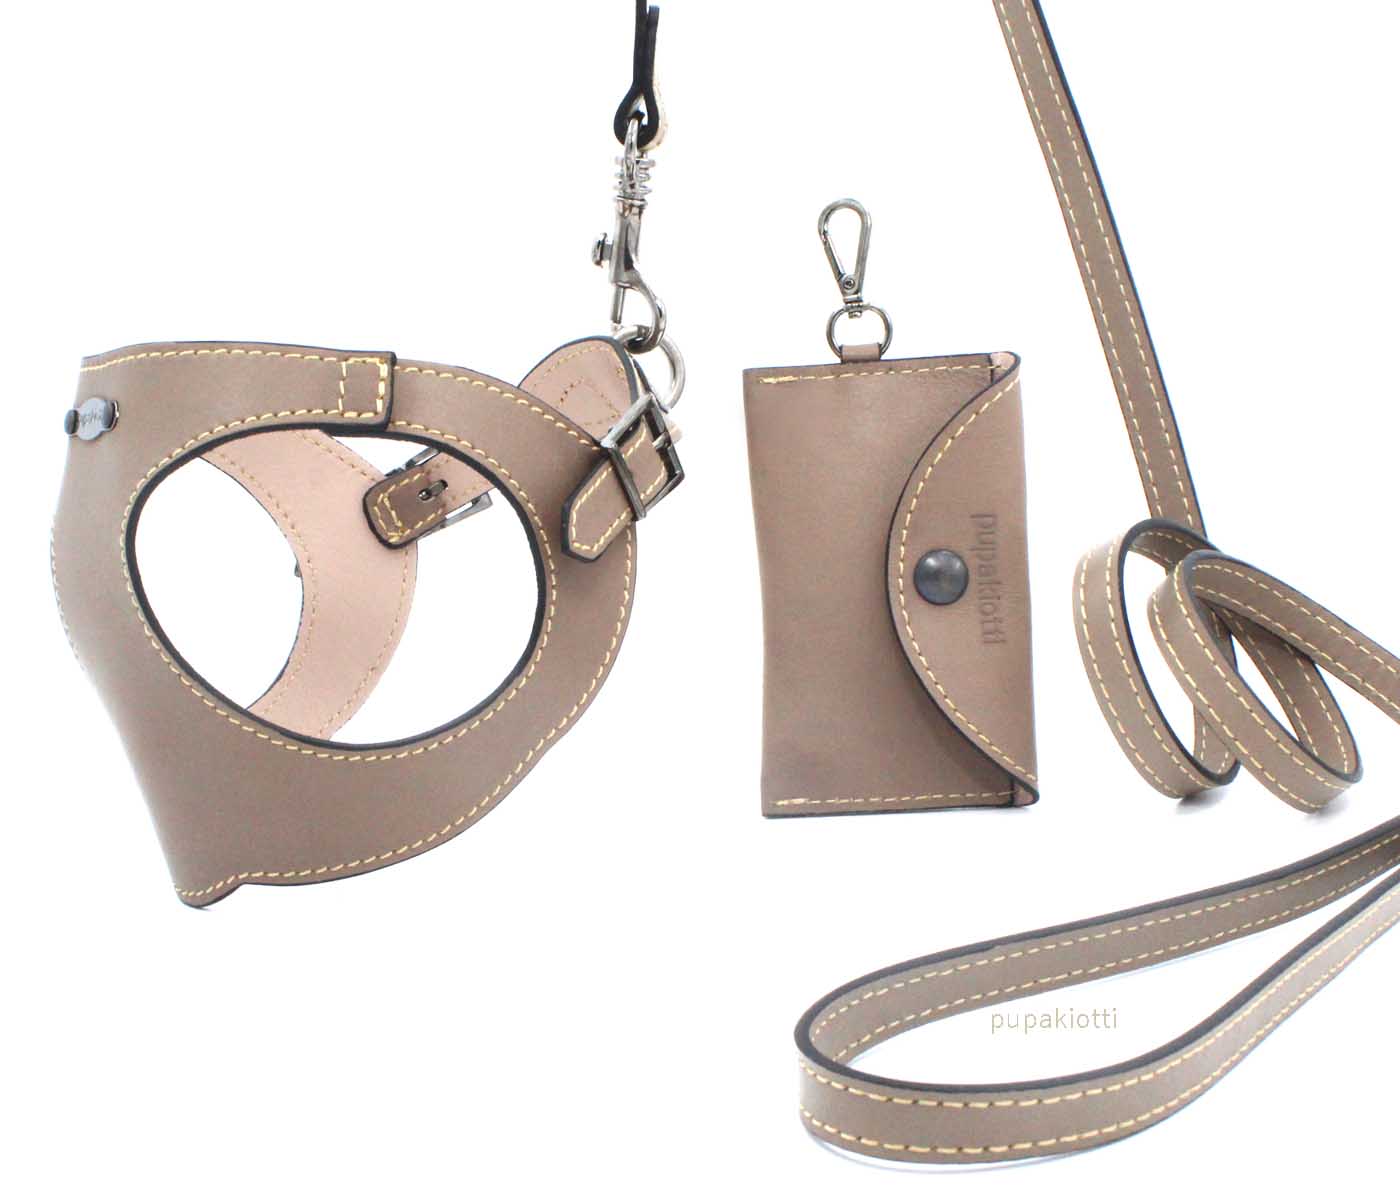 PREMIUM. SET 3 pieces. Leather harness and leash with poop bags dispenser for dog